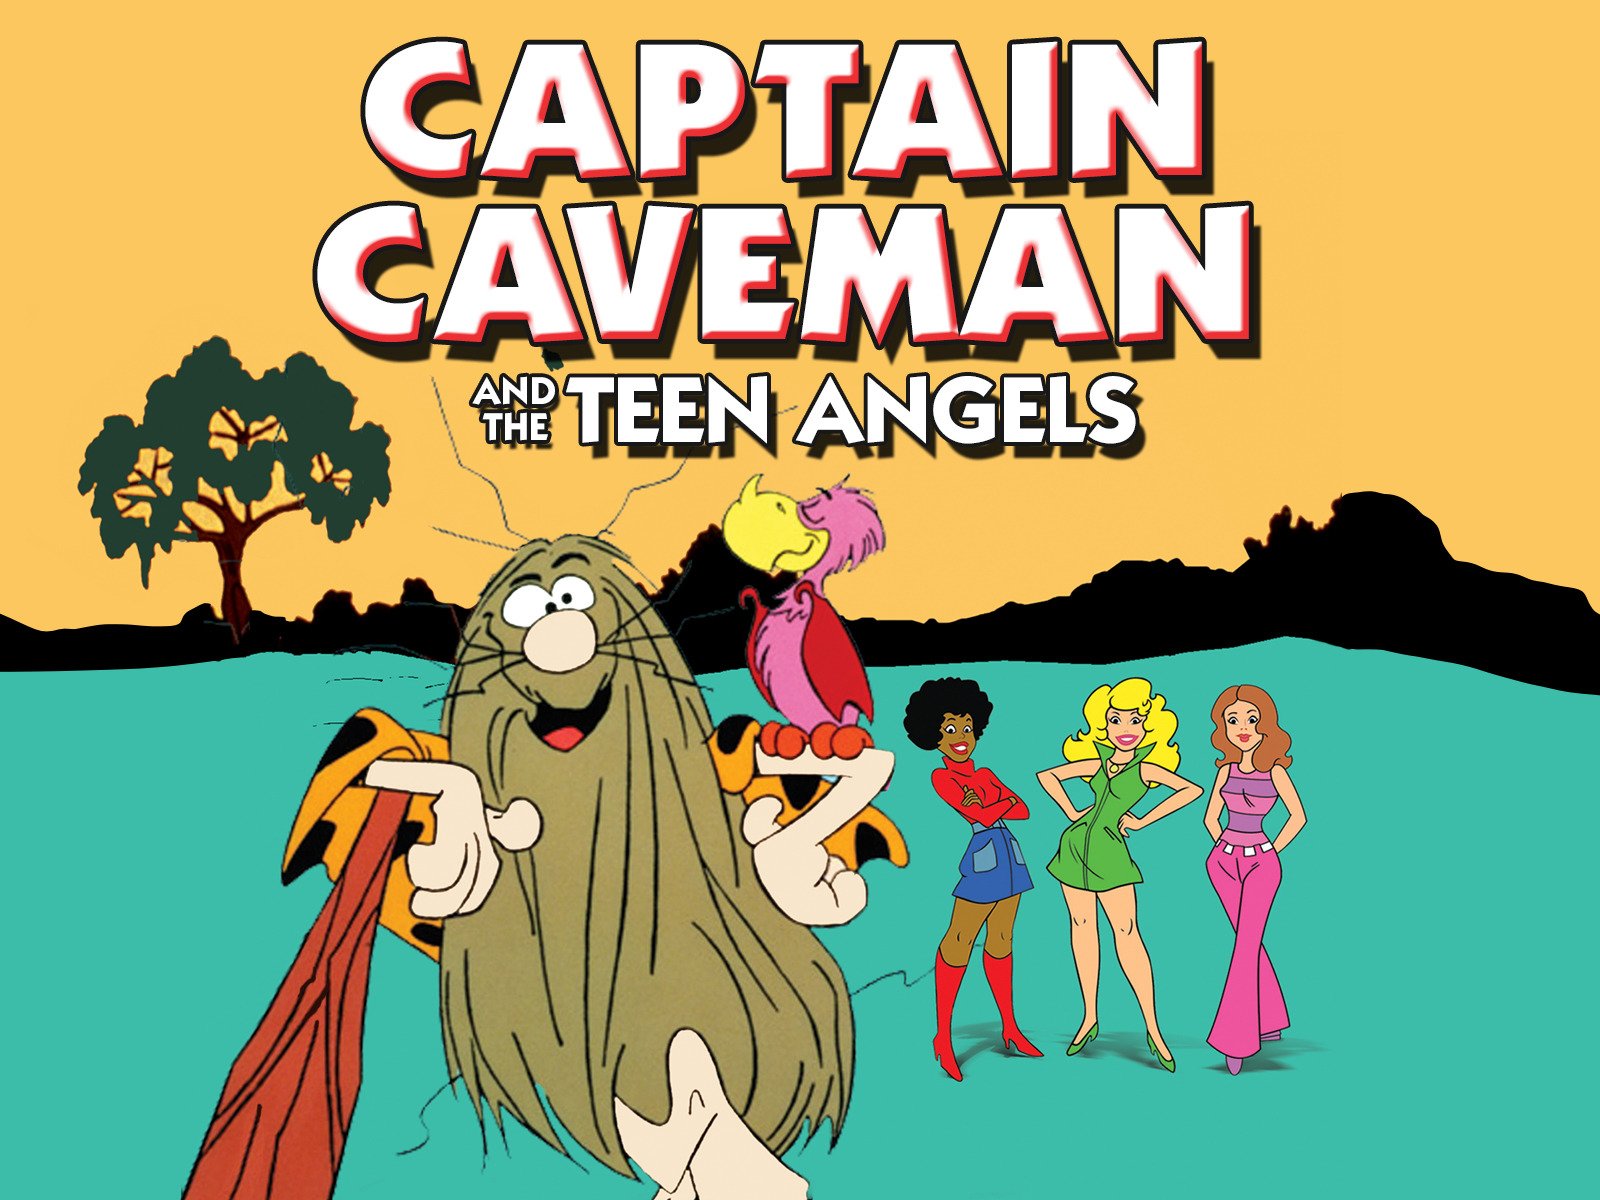 20-facts-about-captain-caveman-captain-caveman-and-the-teen-angels